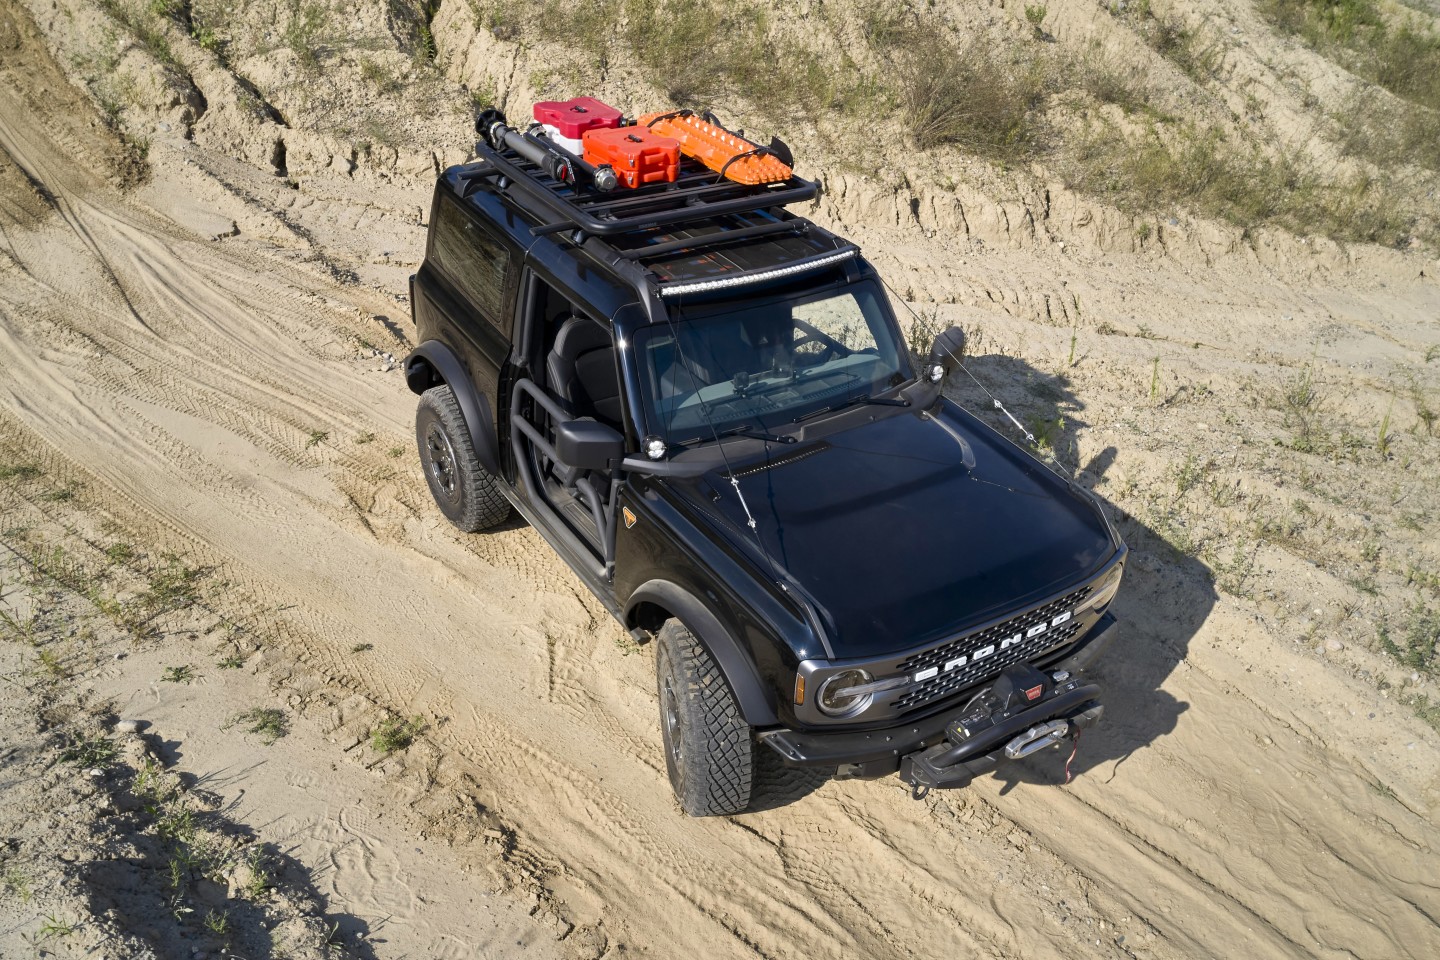 Like the other concepts, the Bronco Two-Door Trail Rig includes Yakima roof storage